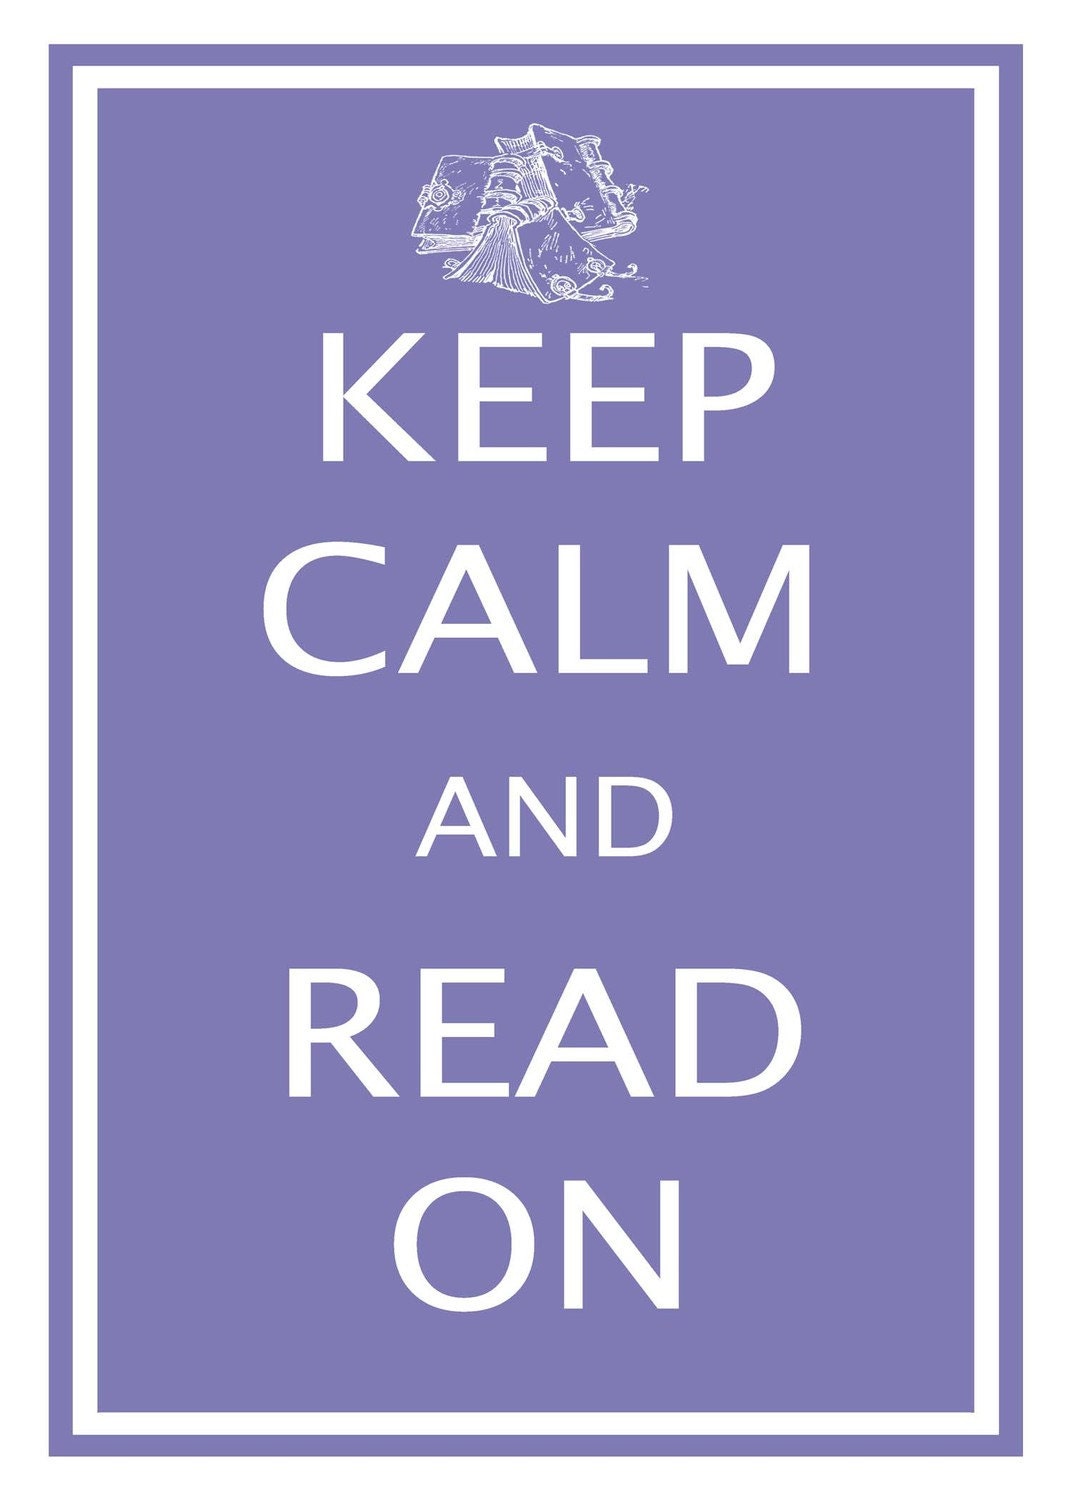 Keep Calm and Read On - 11x17 Plum Poster Buy 1 Get 1 Free Sale